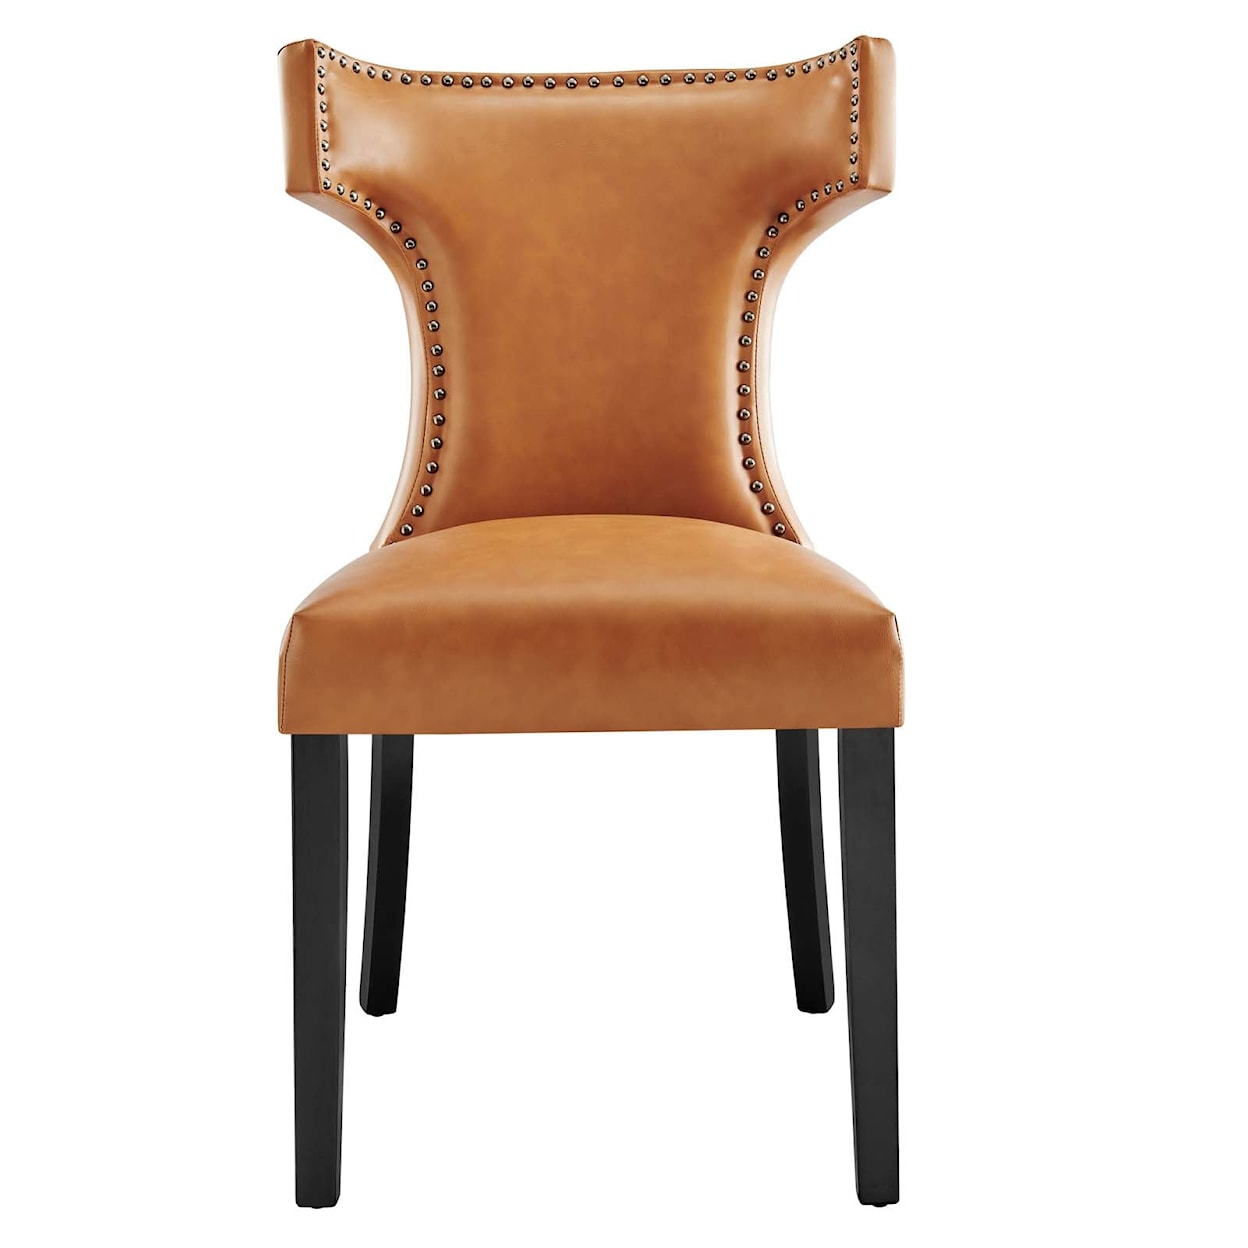 Modway Curve Curve Dining Chair